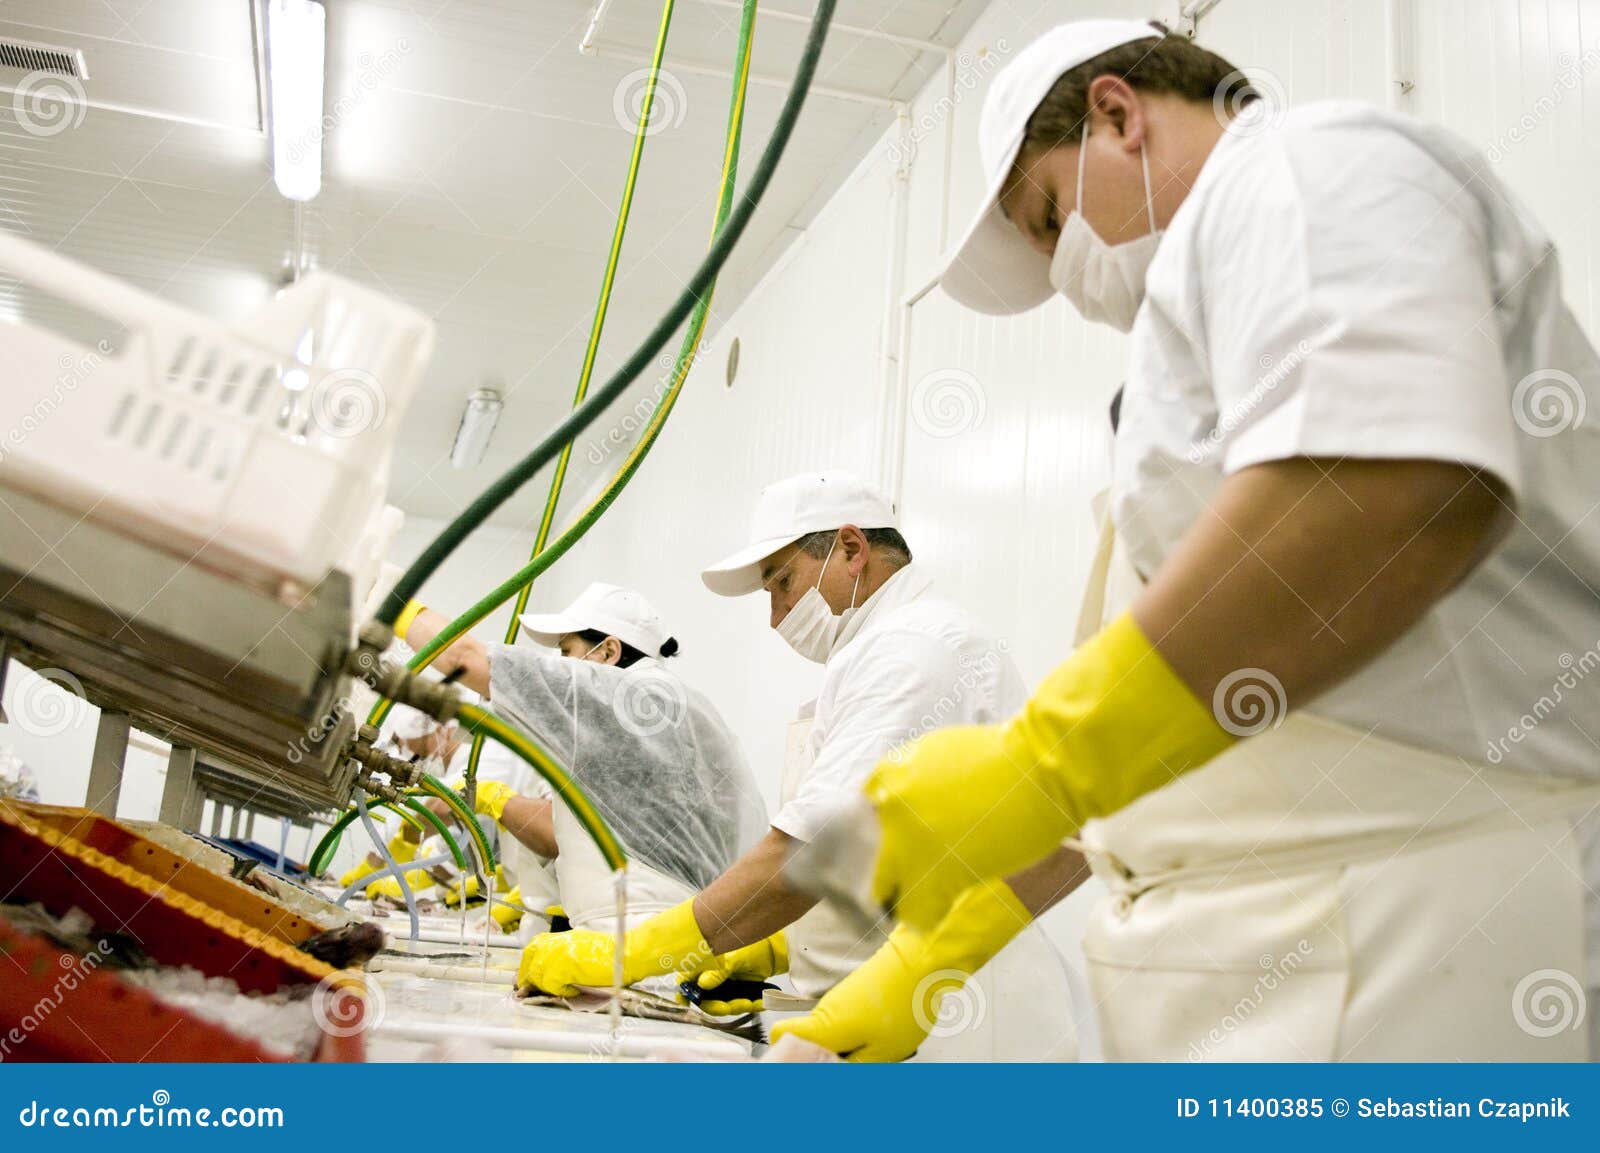 food processing workers